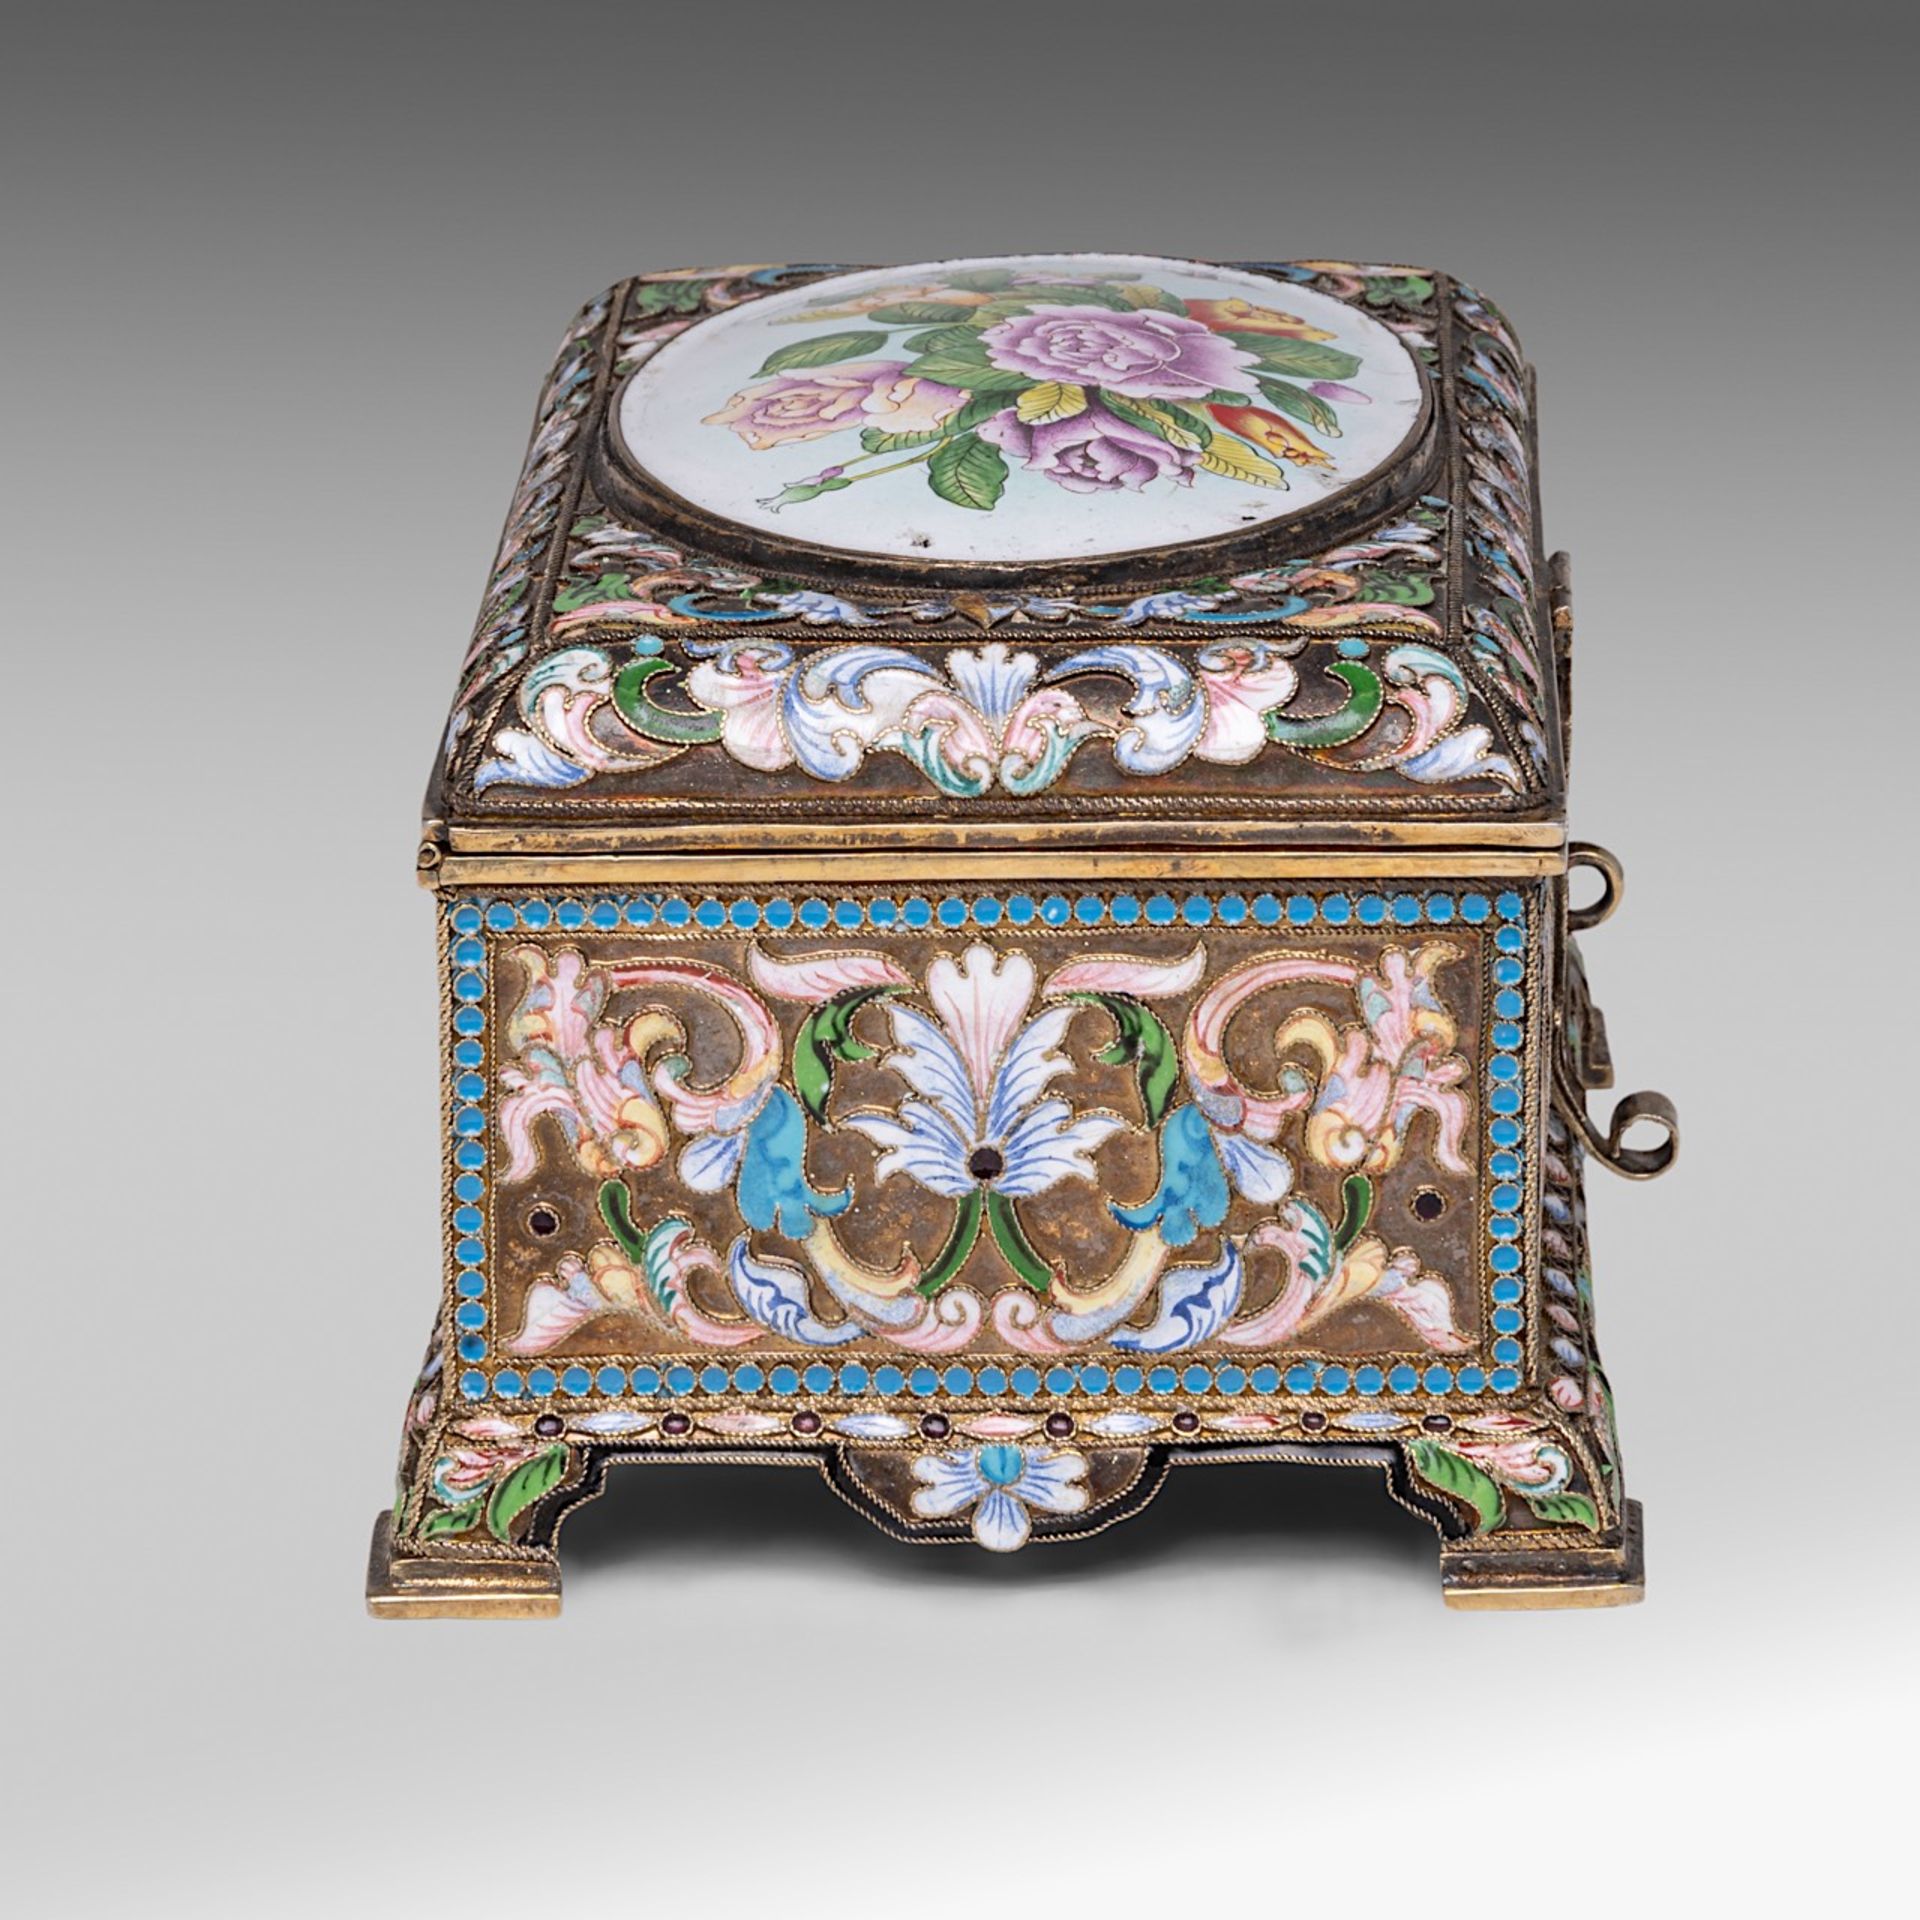 A Russian silver and enamel floral decorated jewellery box, hallmarked 84 Zolotniki, H 8 - 15 - 10 c - Image 5 of 9